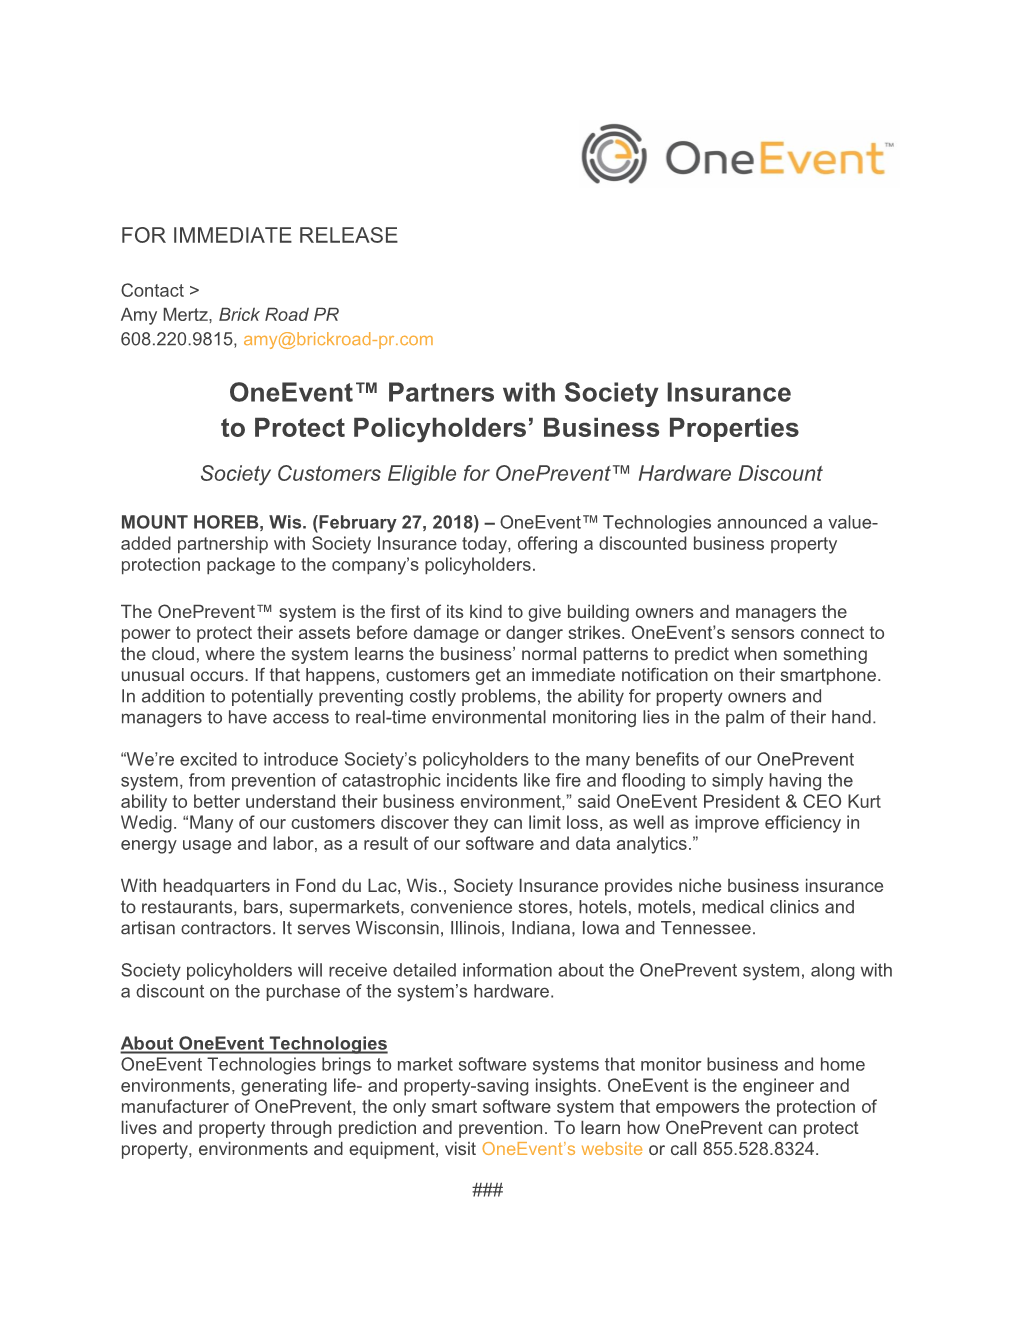 Oneevent™ Partners with Society Insurance to Protect Policyholders’ Business Properties Society Customers Eligible for Oneprevent™ Hardware Discount